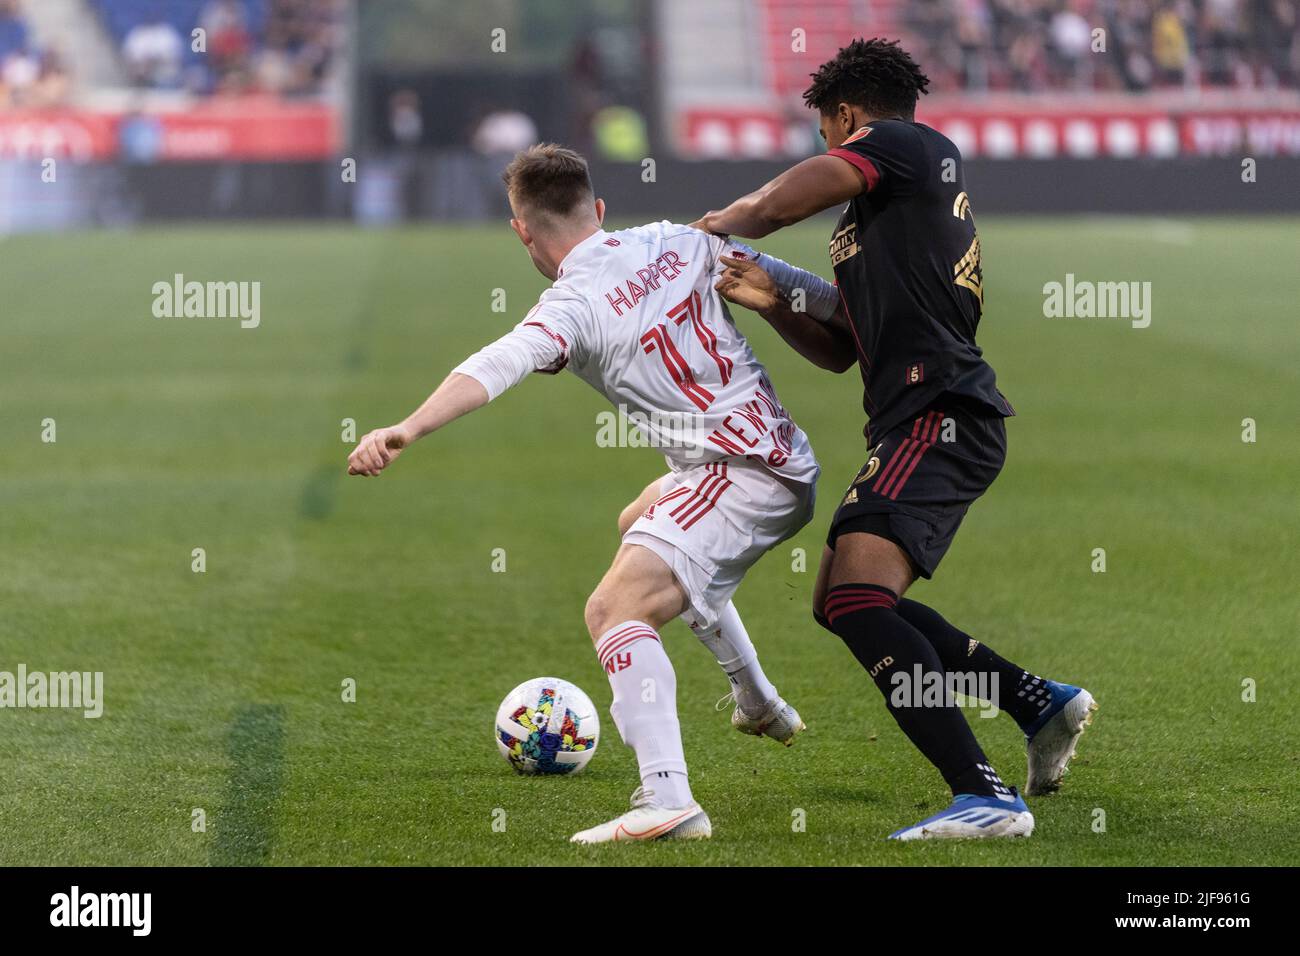 New York, NY - June 30, 2022: Cameron Harper (17) of Red Bulls and Caleb Wiley (26) of Atlanta United fight for ball during MLS regular season game at Red Bull Arena Stock Photo